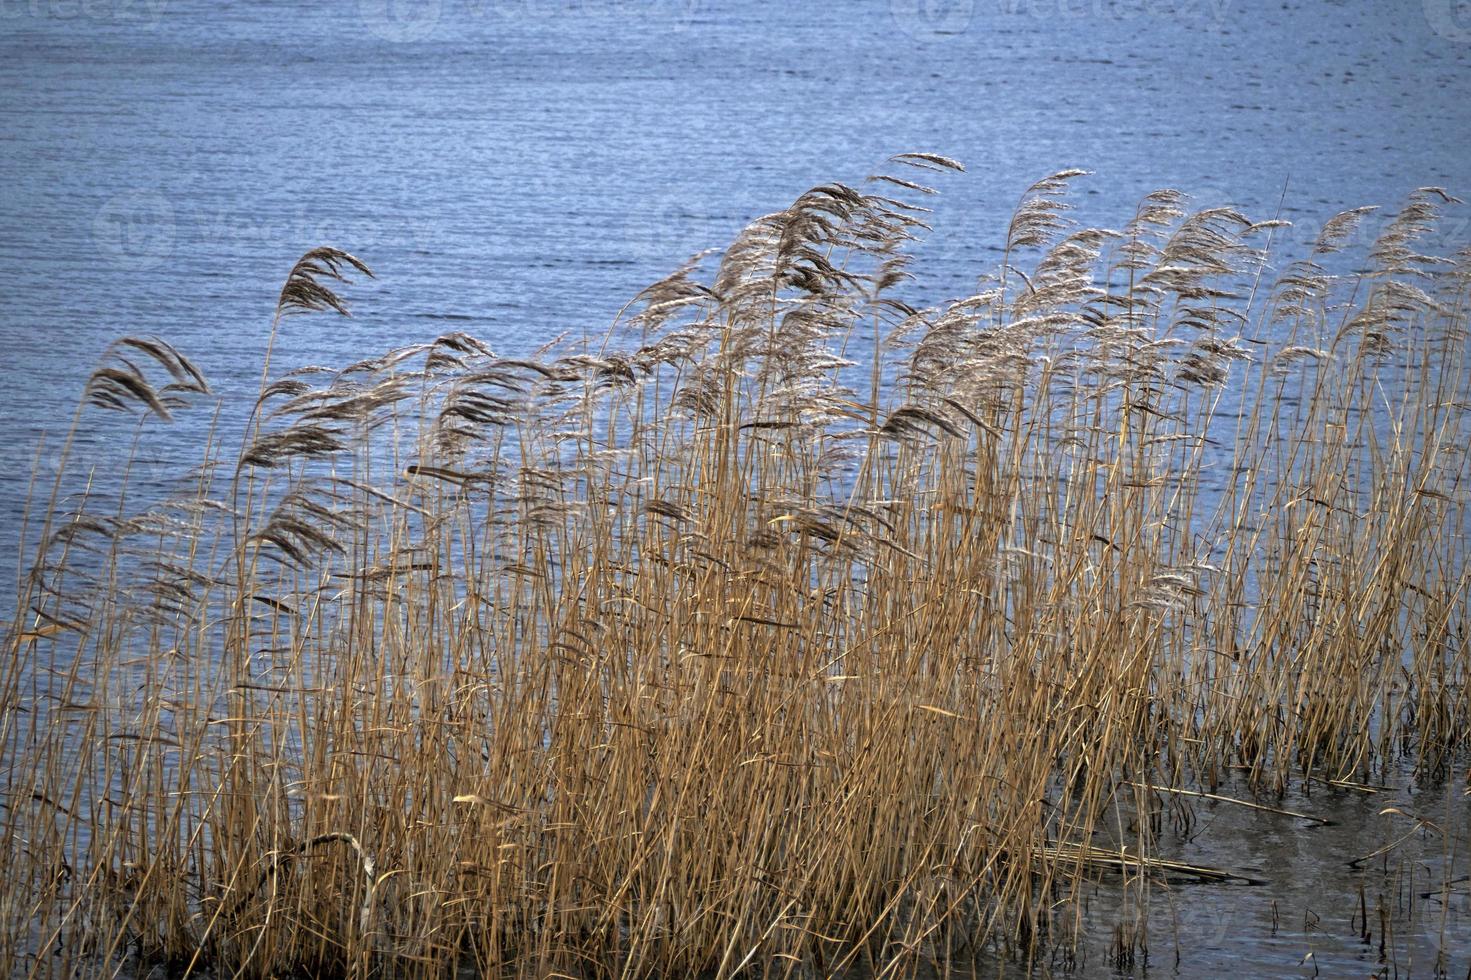 Reeds blowing in the wind beside a lake photo